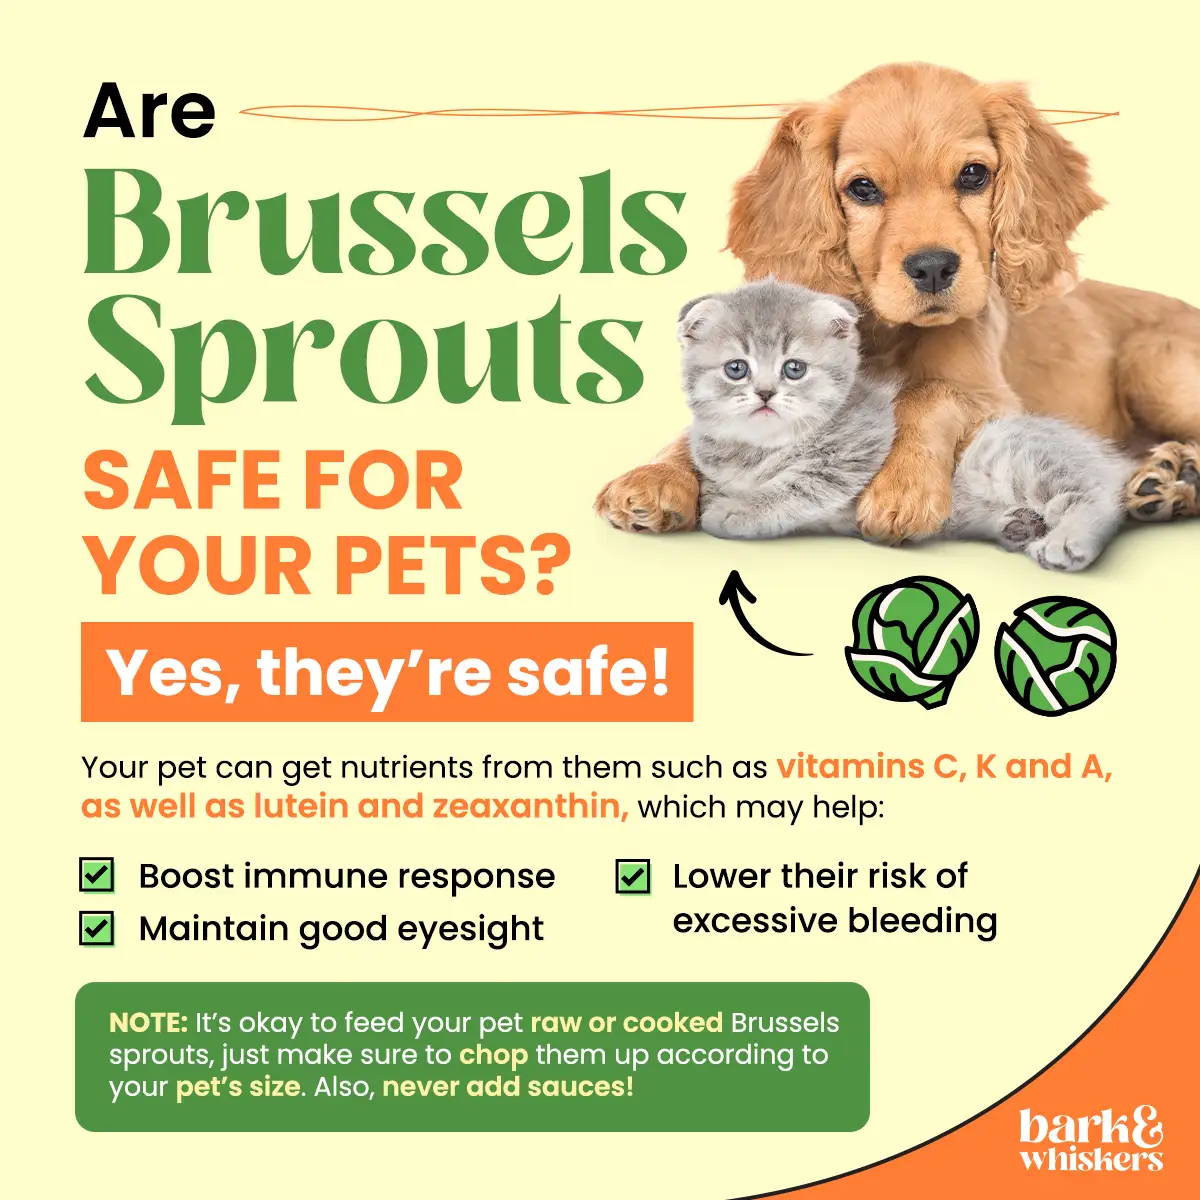 are brussels sprouts safe for pets?